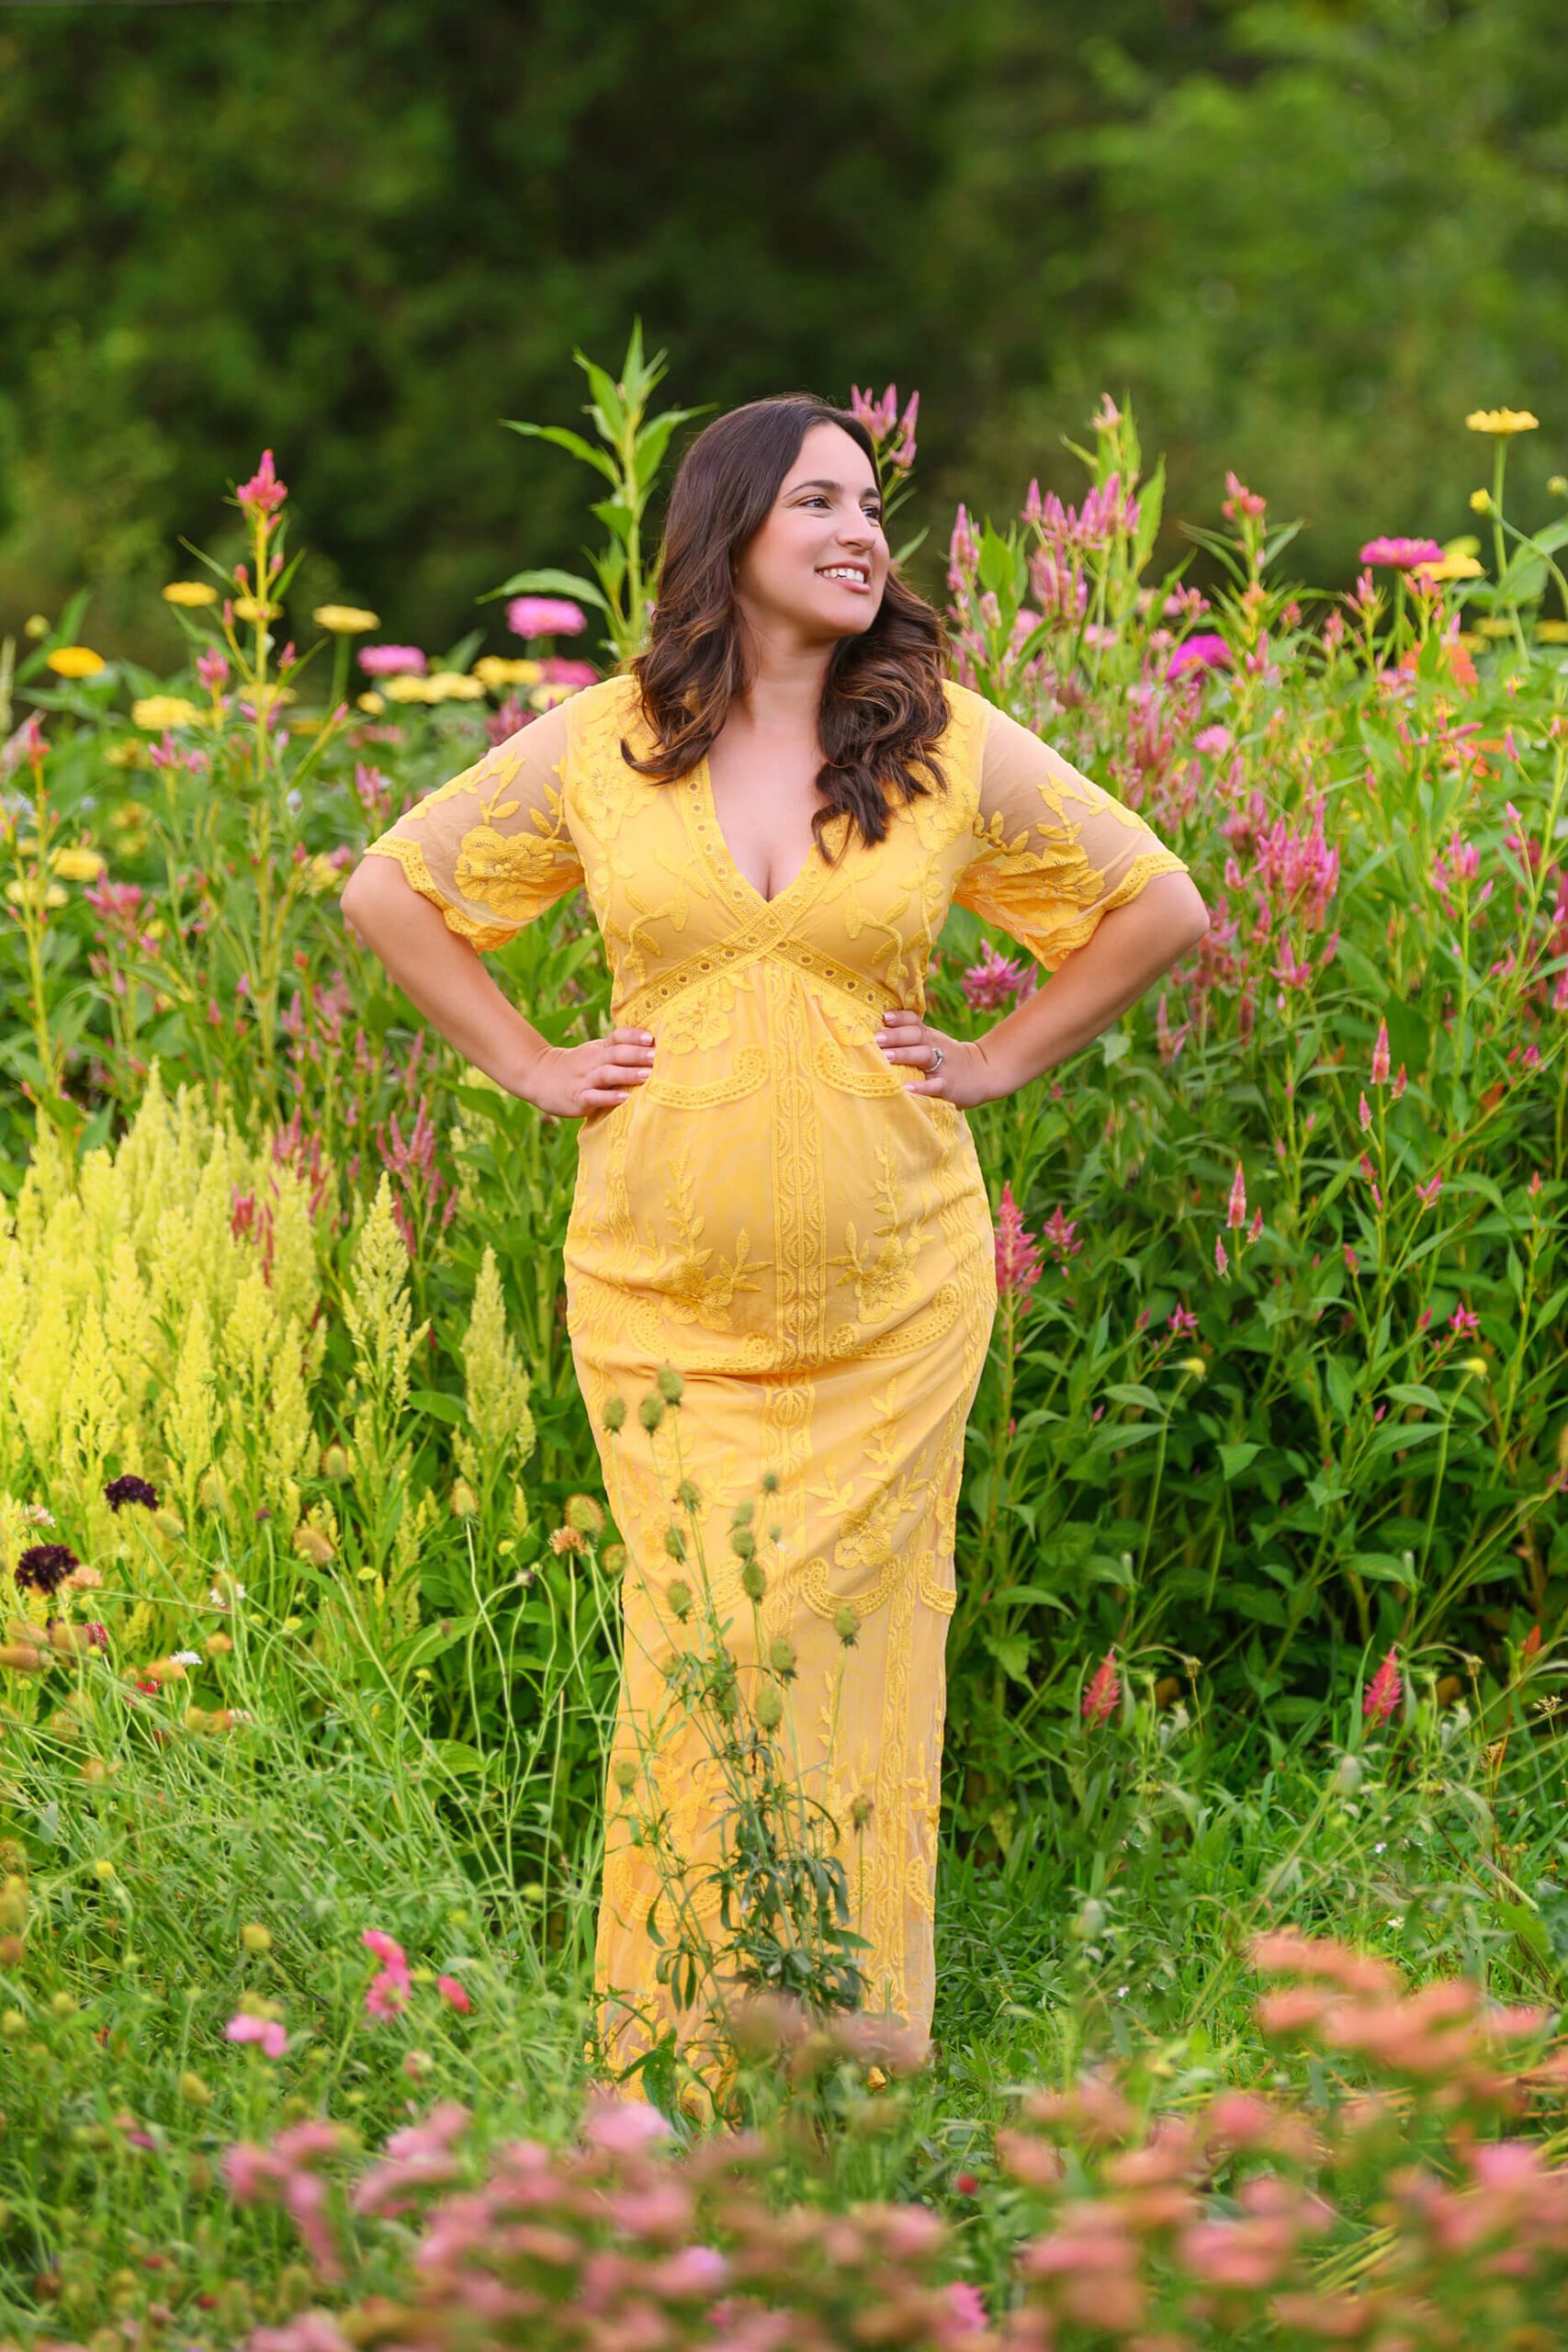 Mom to be in yellow dress in a flower garden for her Toronto Outdoor Maternity Photos